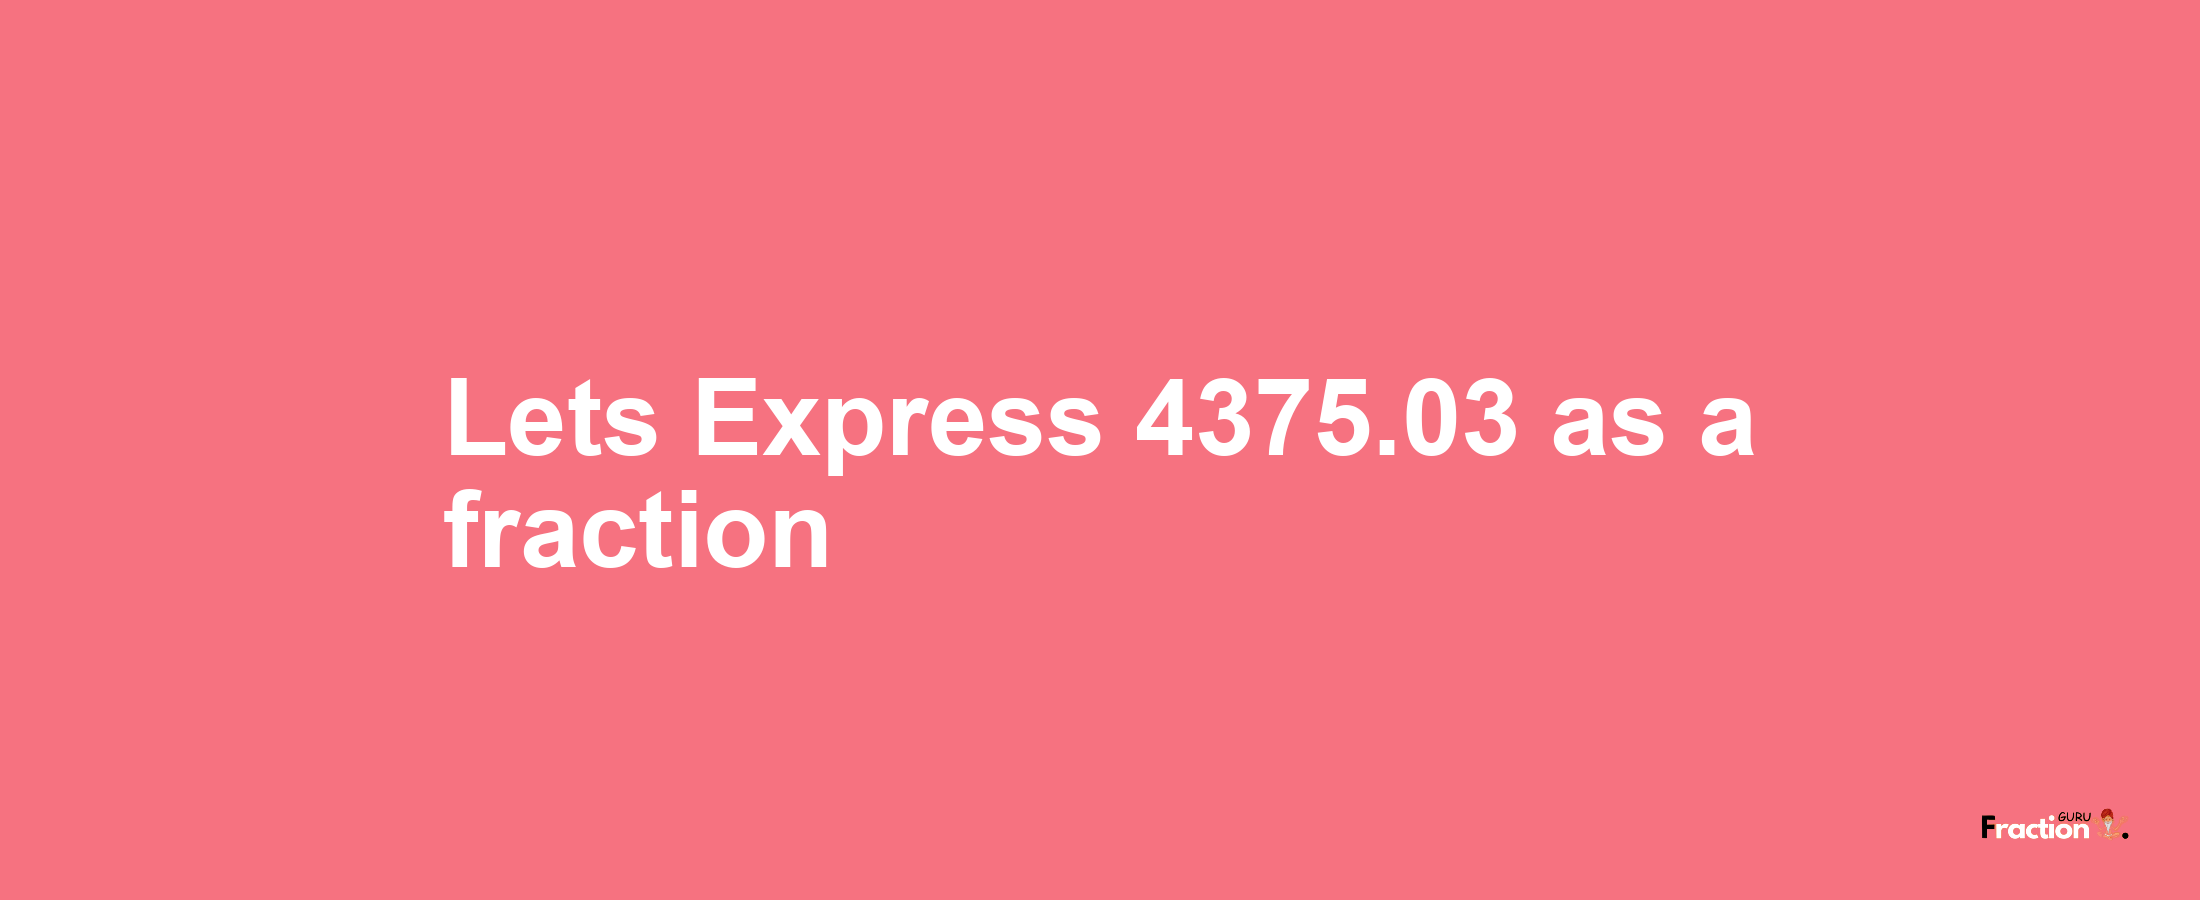 Lets Express 4375.03 as afraction